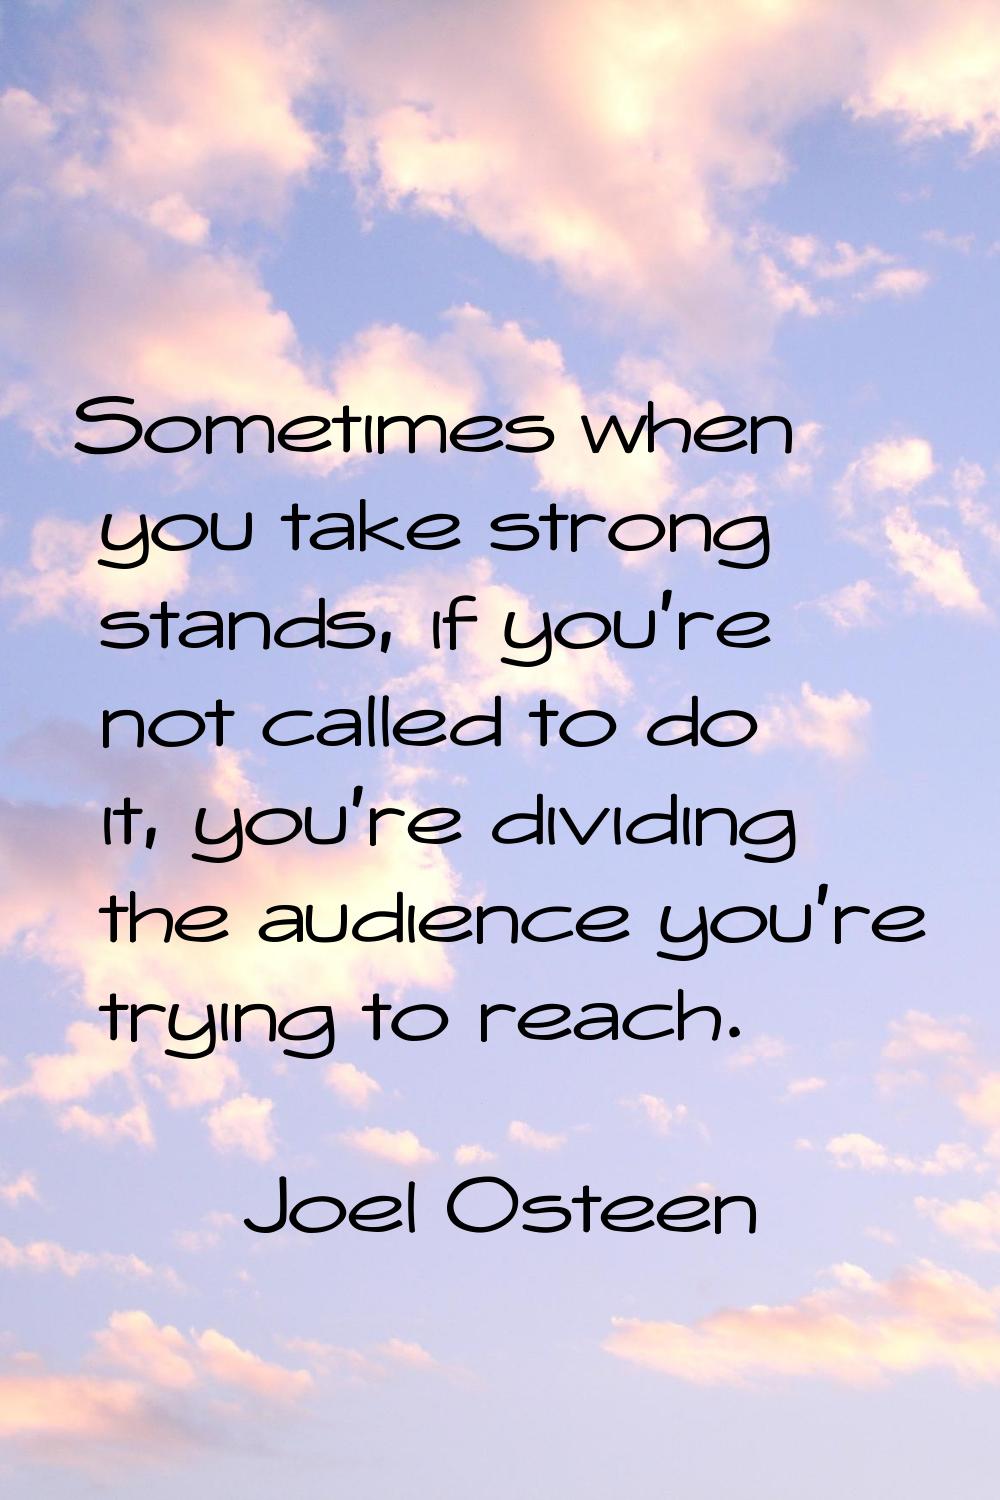 Sometimes when you take strong stands, if you're not called to do it, you're dividing the audience 